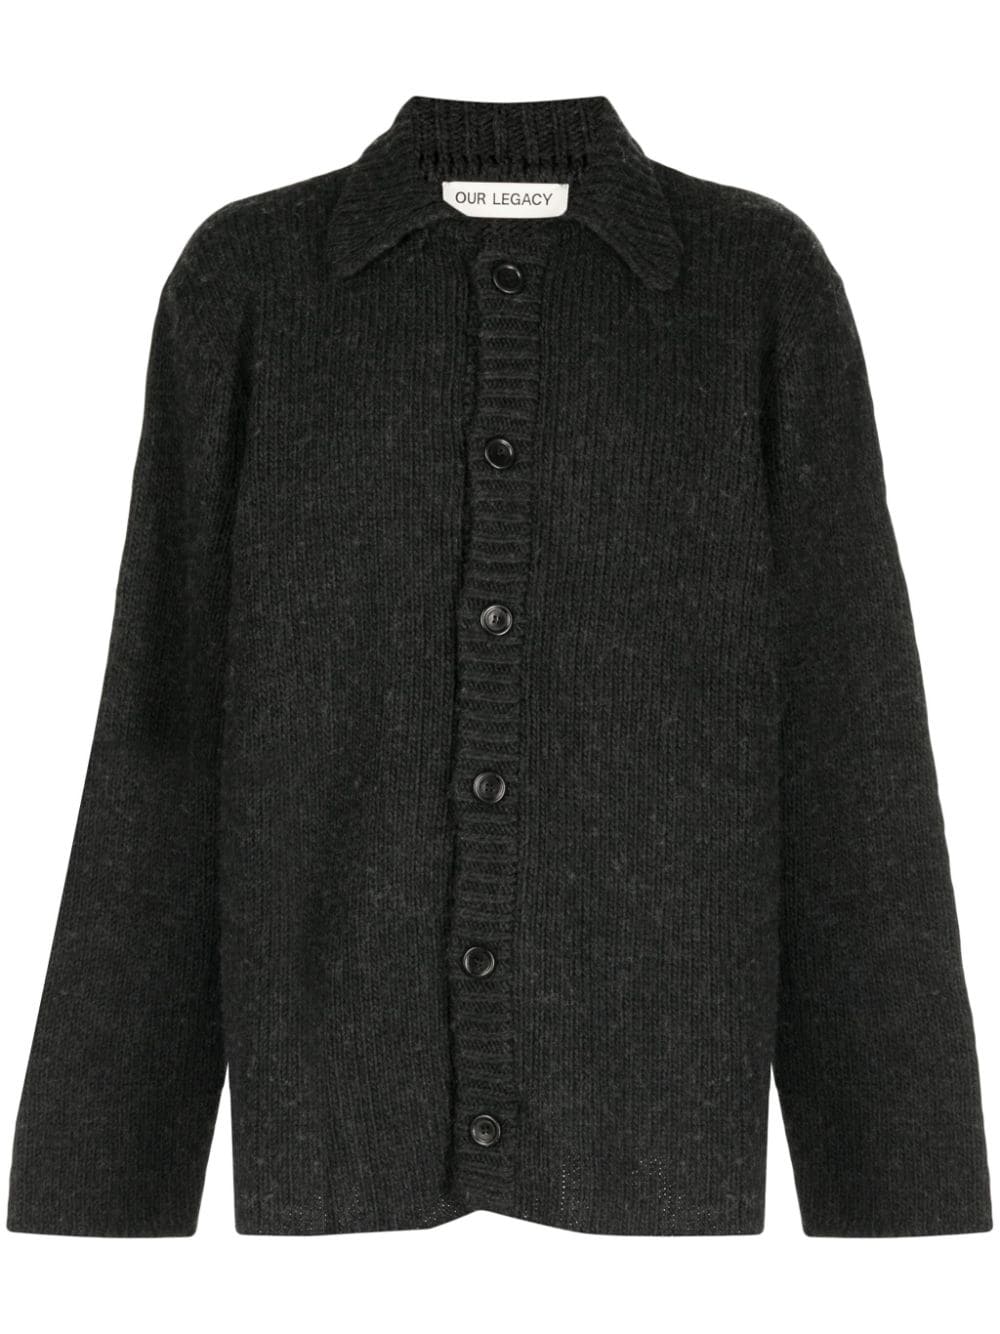 OUR LEGACY BRUSHED LONG-SLEEVE CARDIGAN